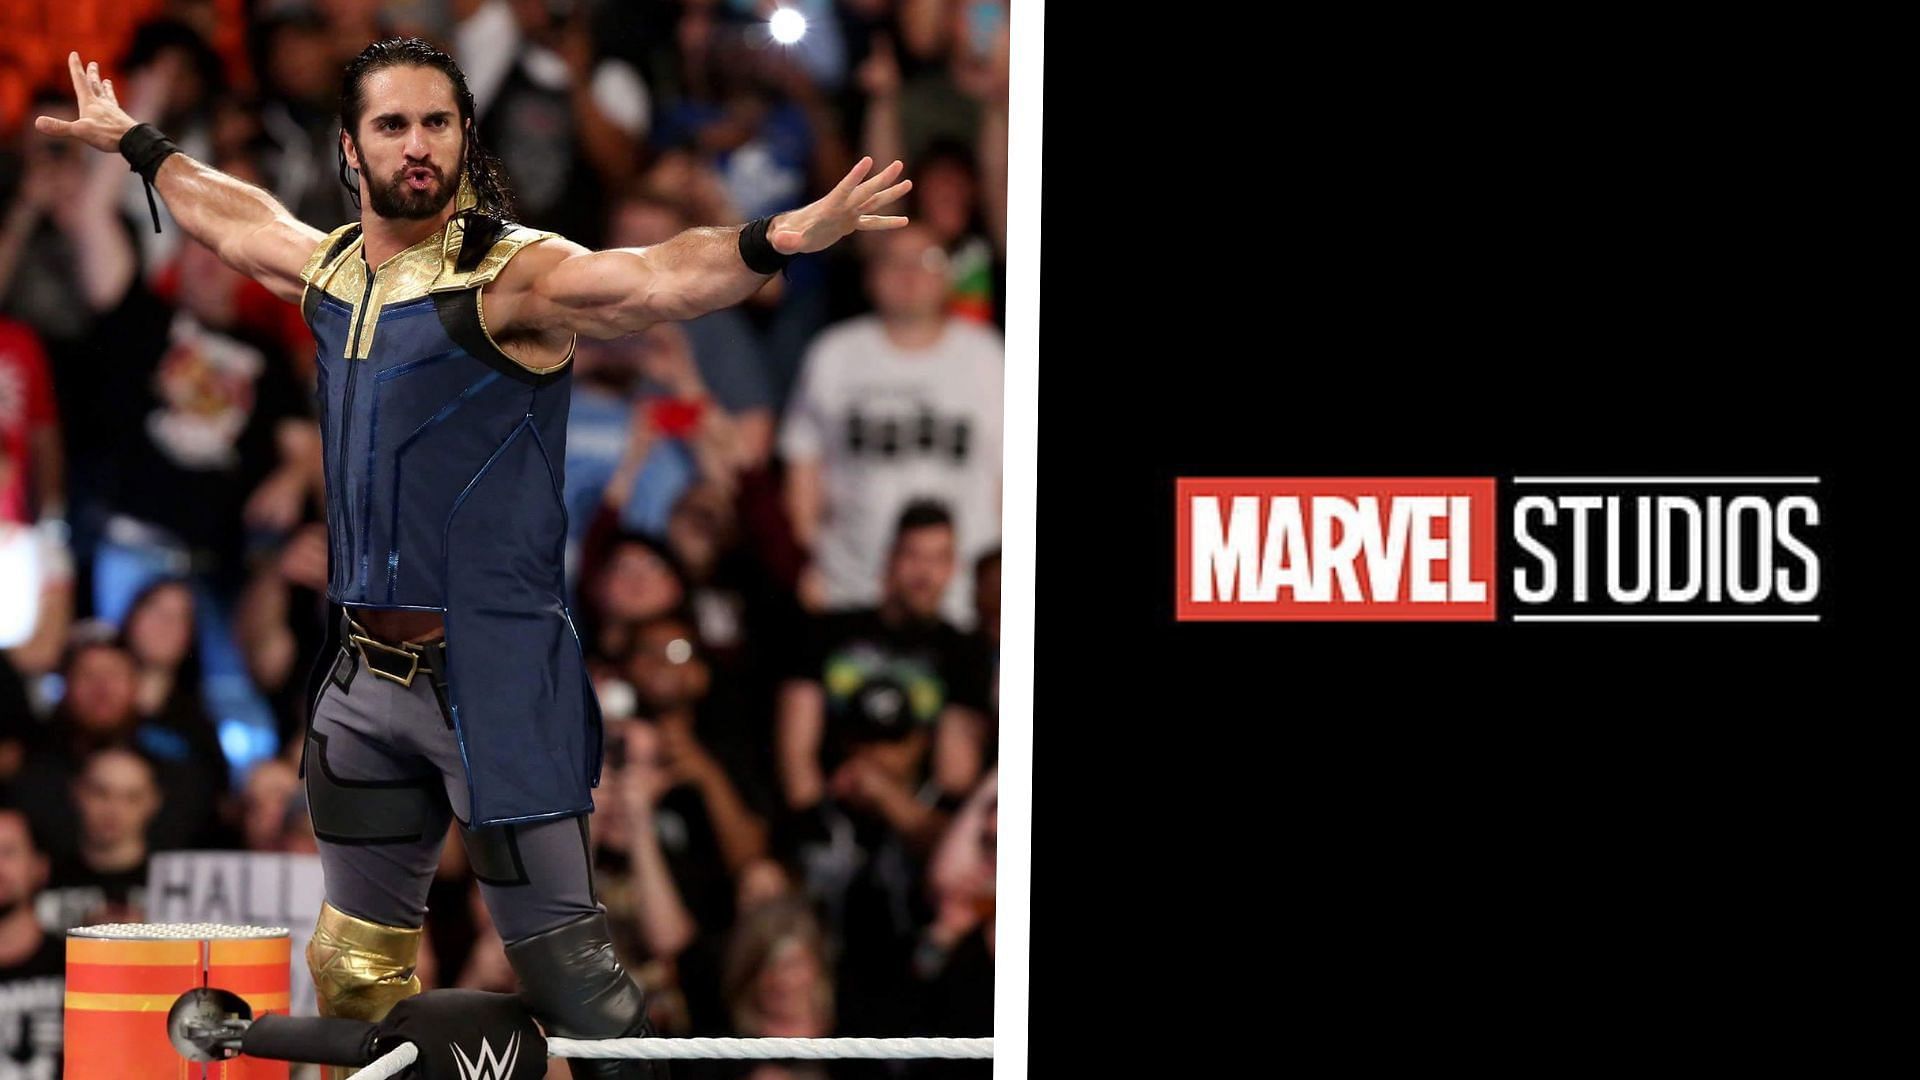 Seth Rollins joins the MCU in a currently undisclosed role